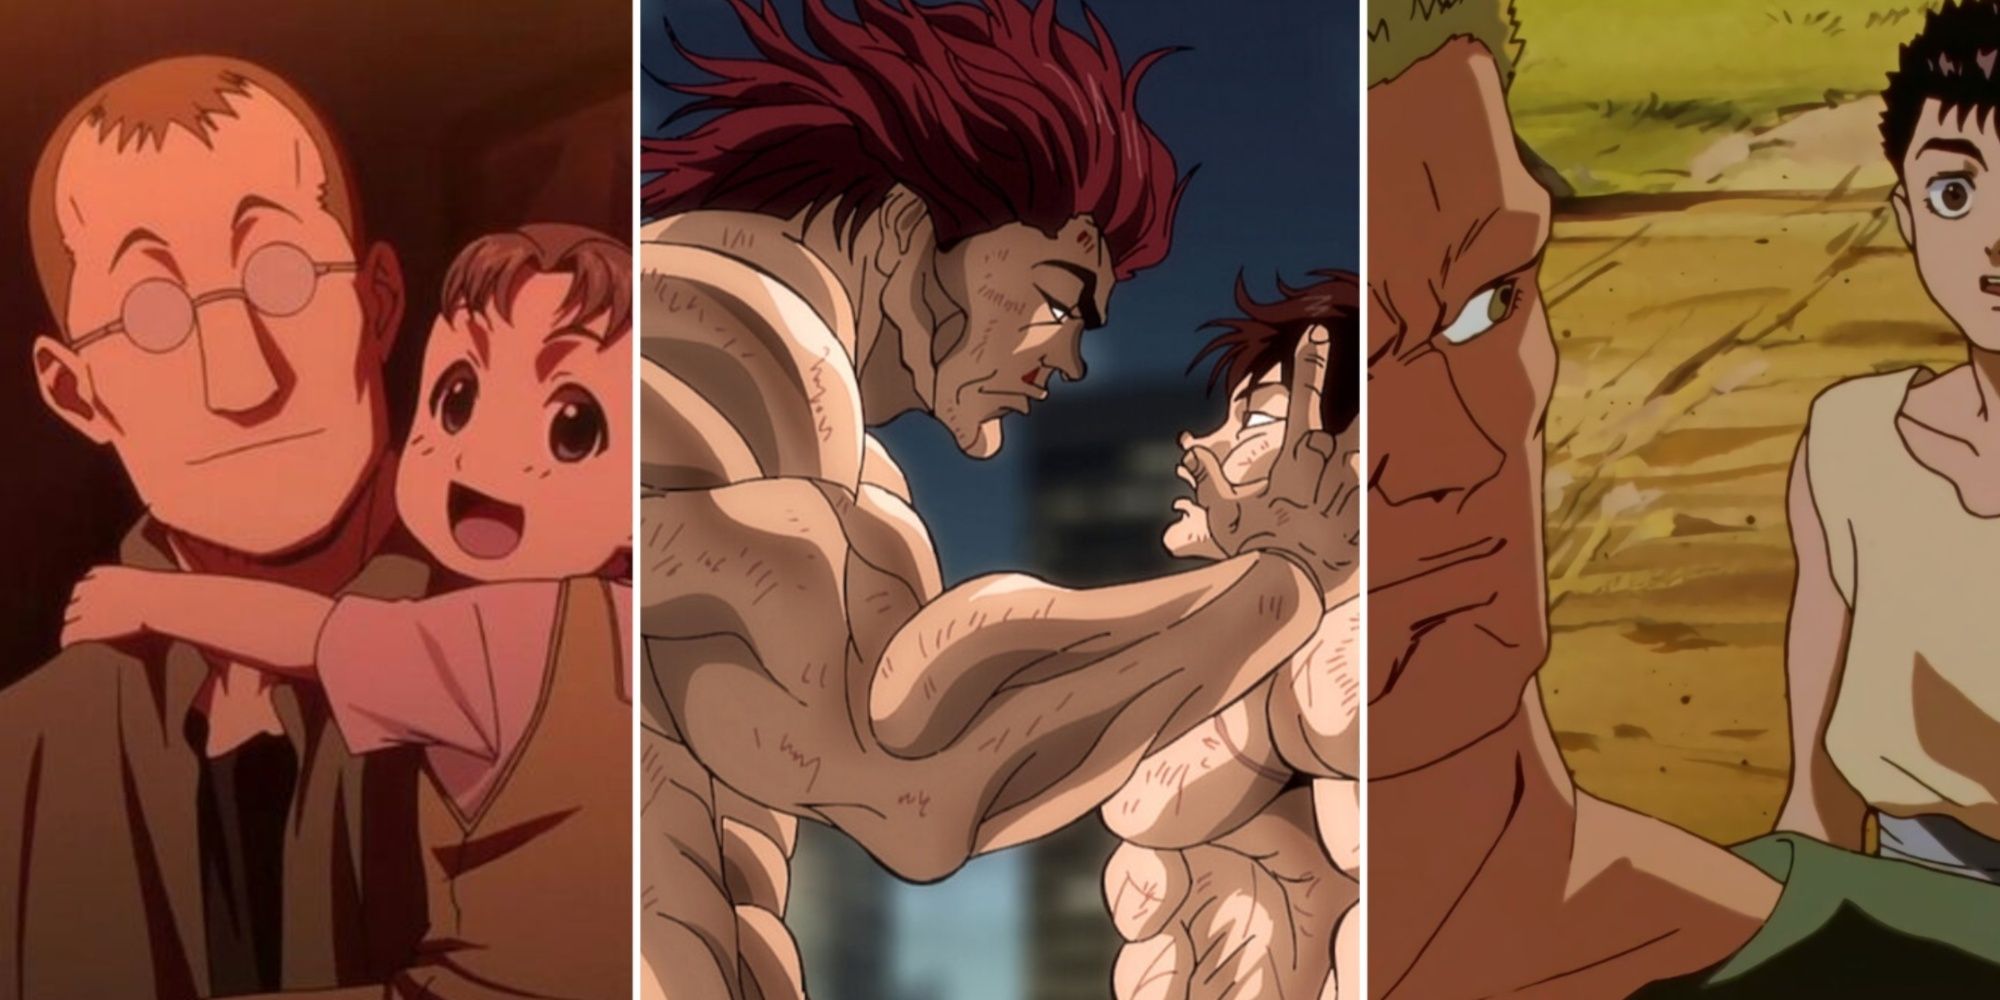 A collage of the dads from Full Metal Alchemist, Grappler Baki, and Berserk